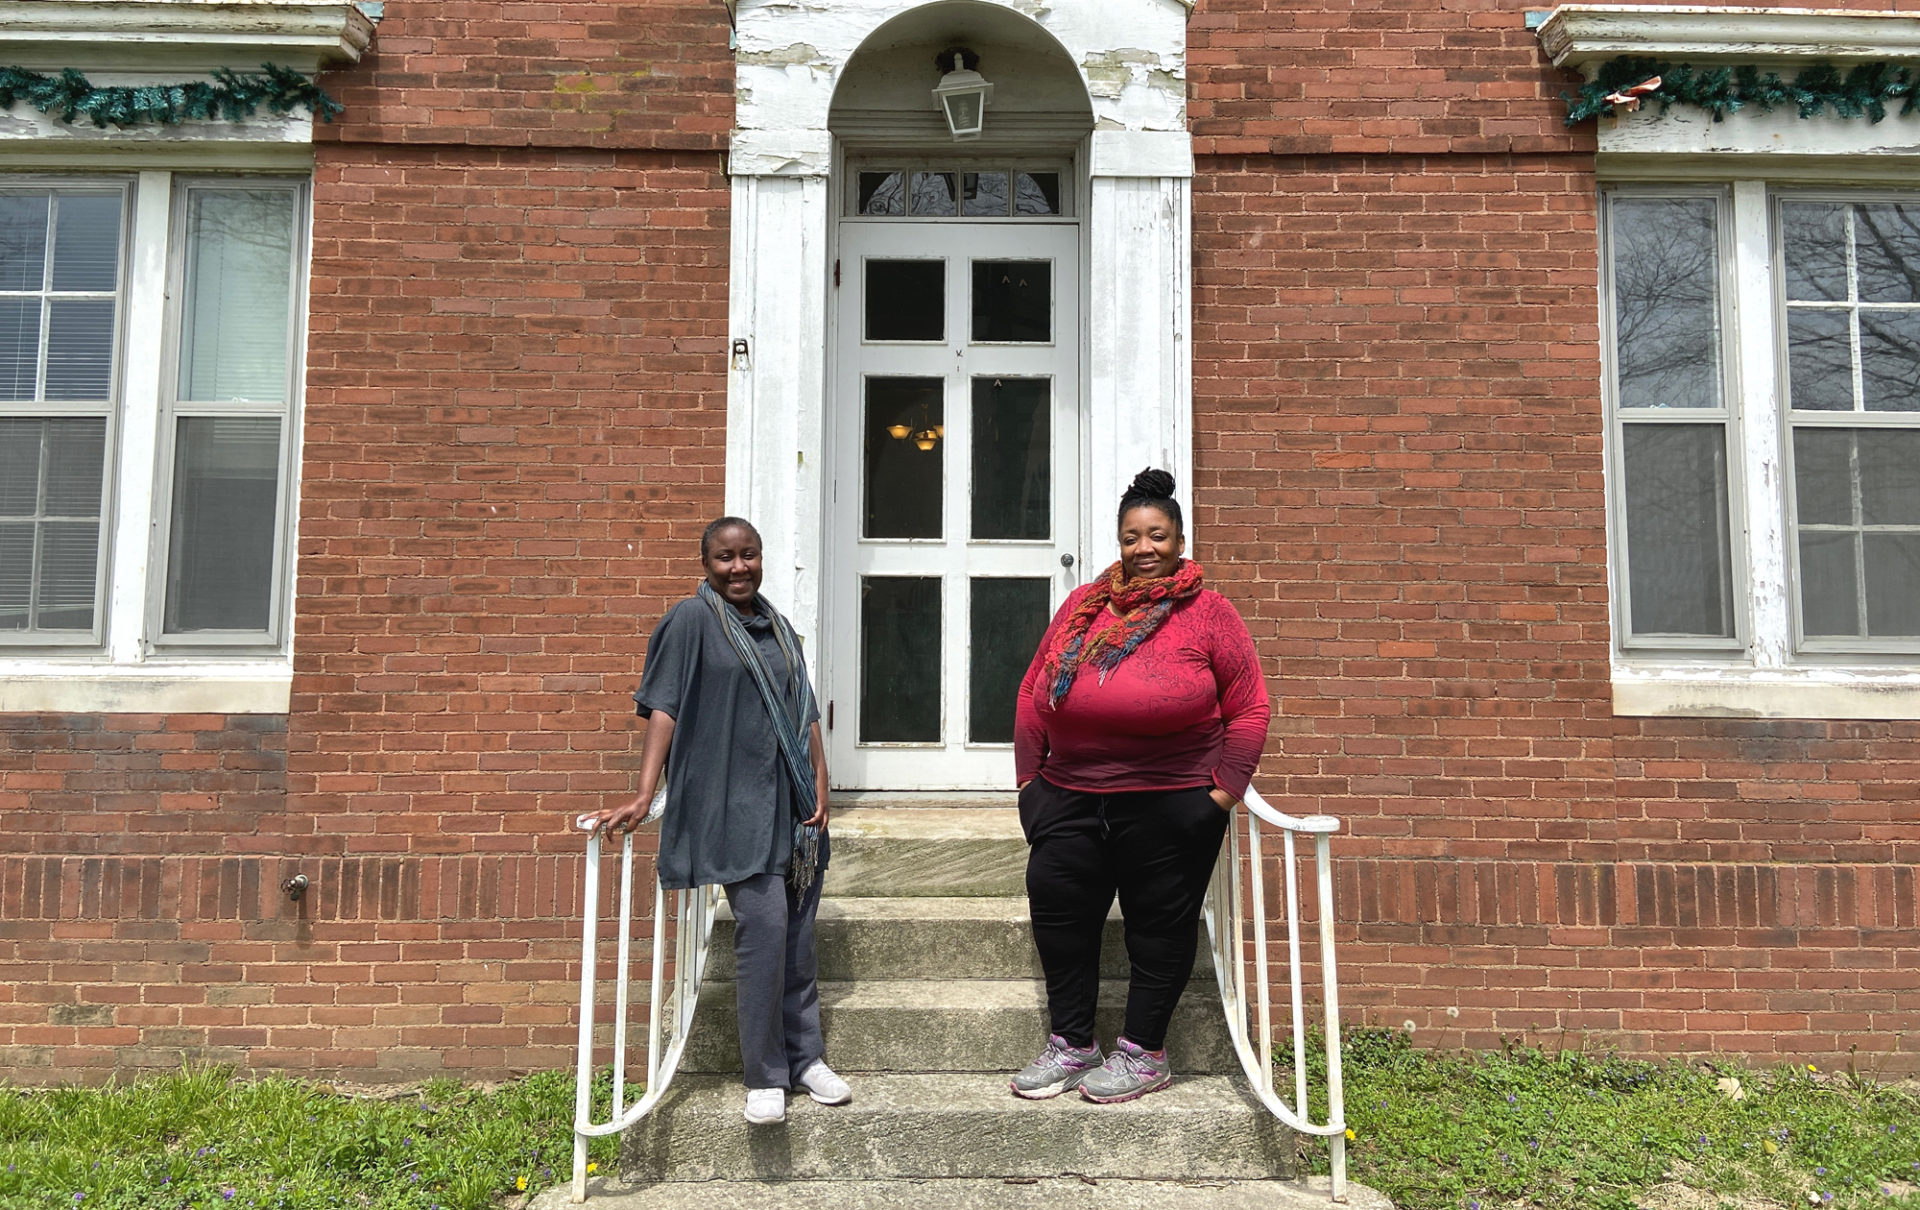 Two Black women are standing on concrete steps, each leaning against a white metal railing. The steps lead to the entrance of a red brick building with a white door.